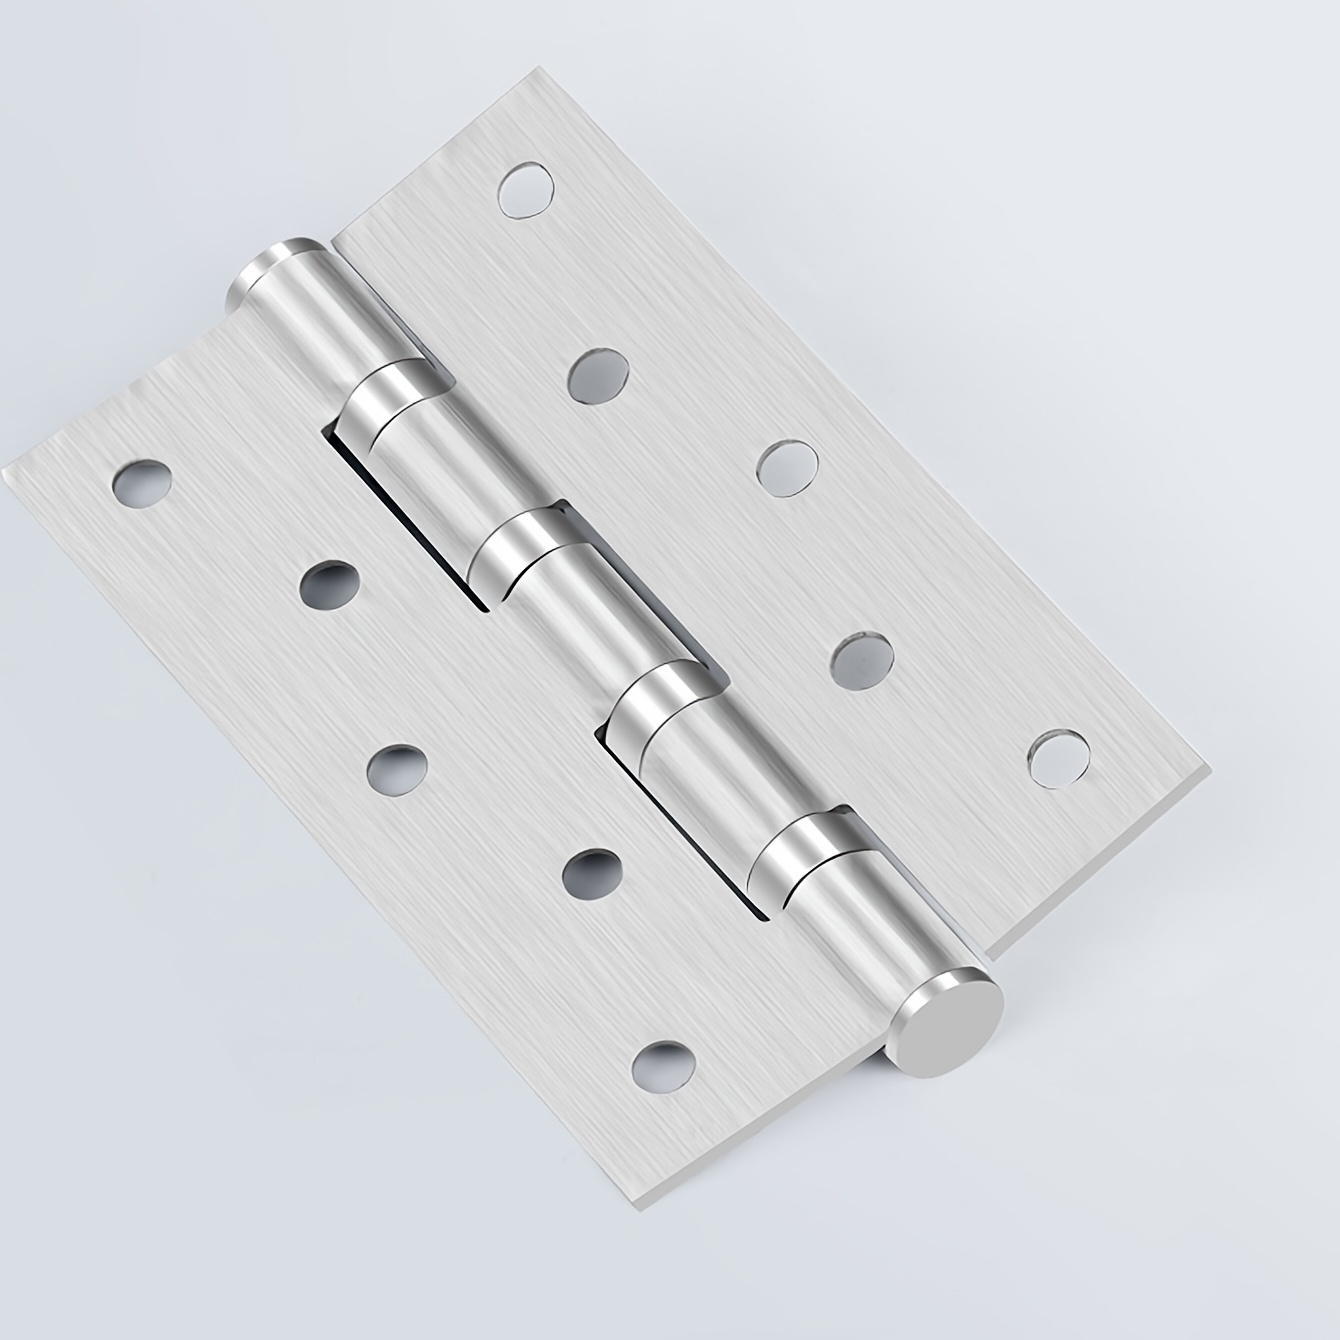 Stainless Steel Hinge, Pack of 12 Folding Door Hinge with 6 Mounting Holes,  Small Door Hinge with Screws for Cupboard, Drawer, Home Furniture Hardware  